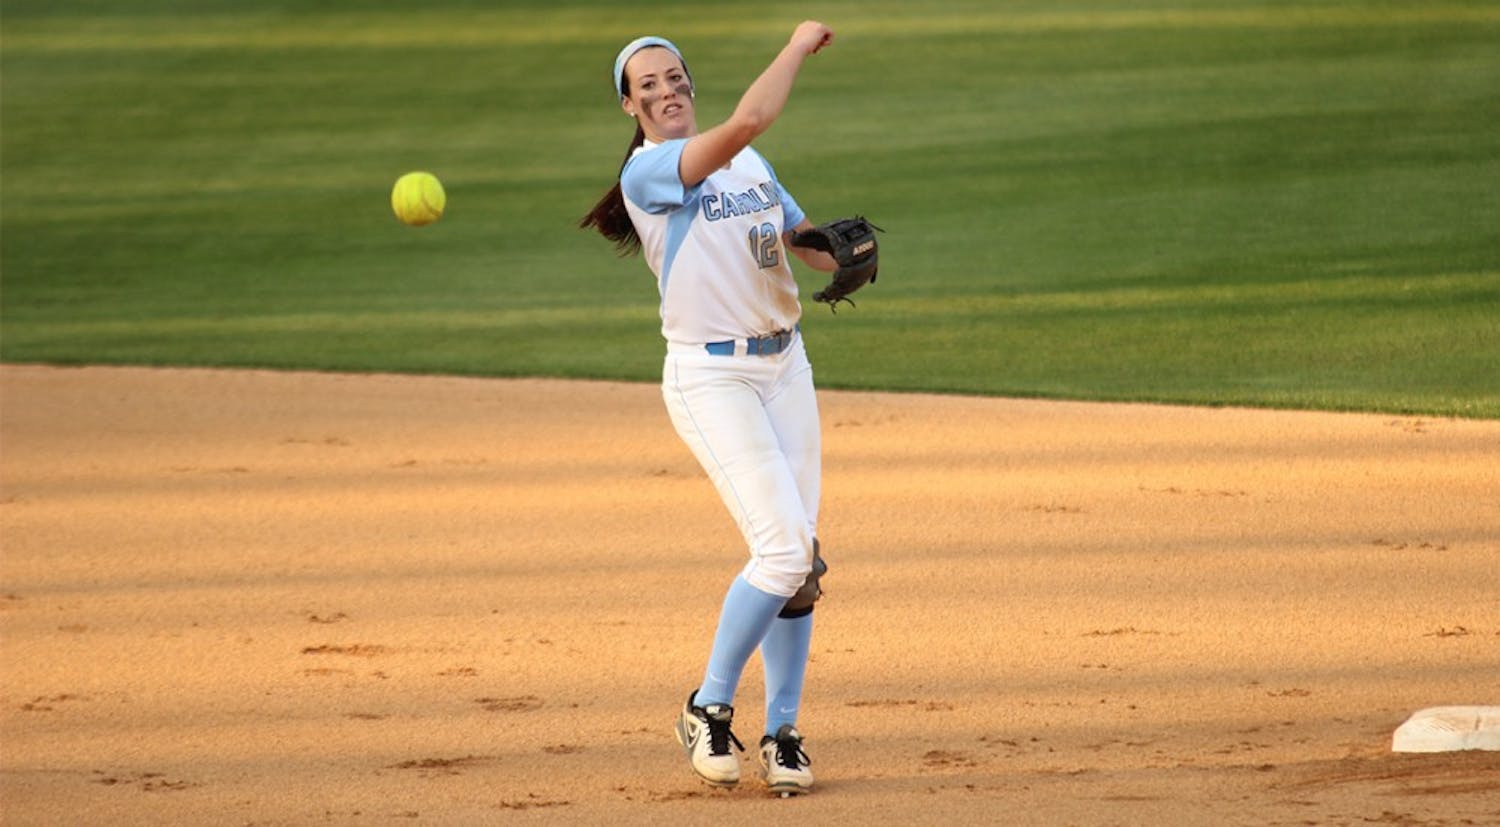 UNC Woman's Softball team lost to Notre Dame 0-8 on Wednesday April 9 for the first of the double-headers. Pictured: No. 12 Kristen Brown, SS, throws to first. 